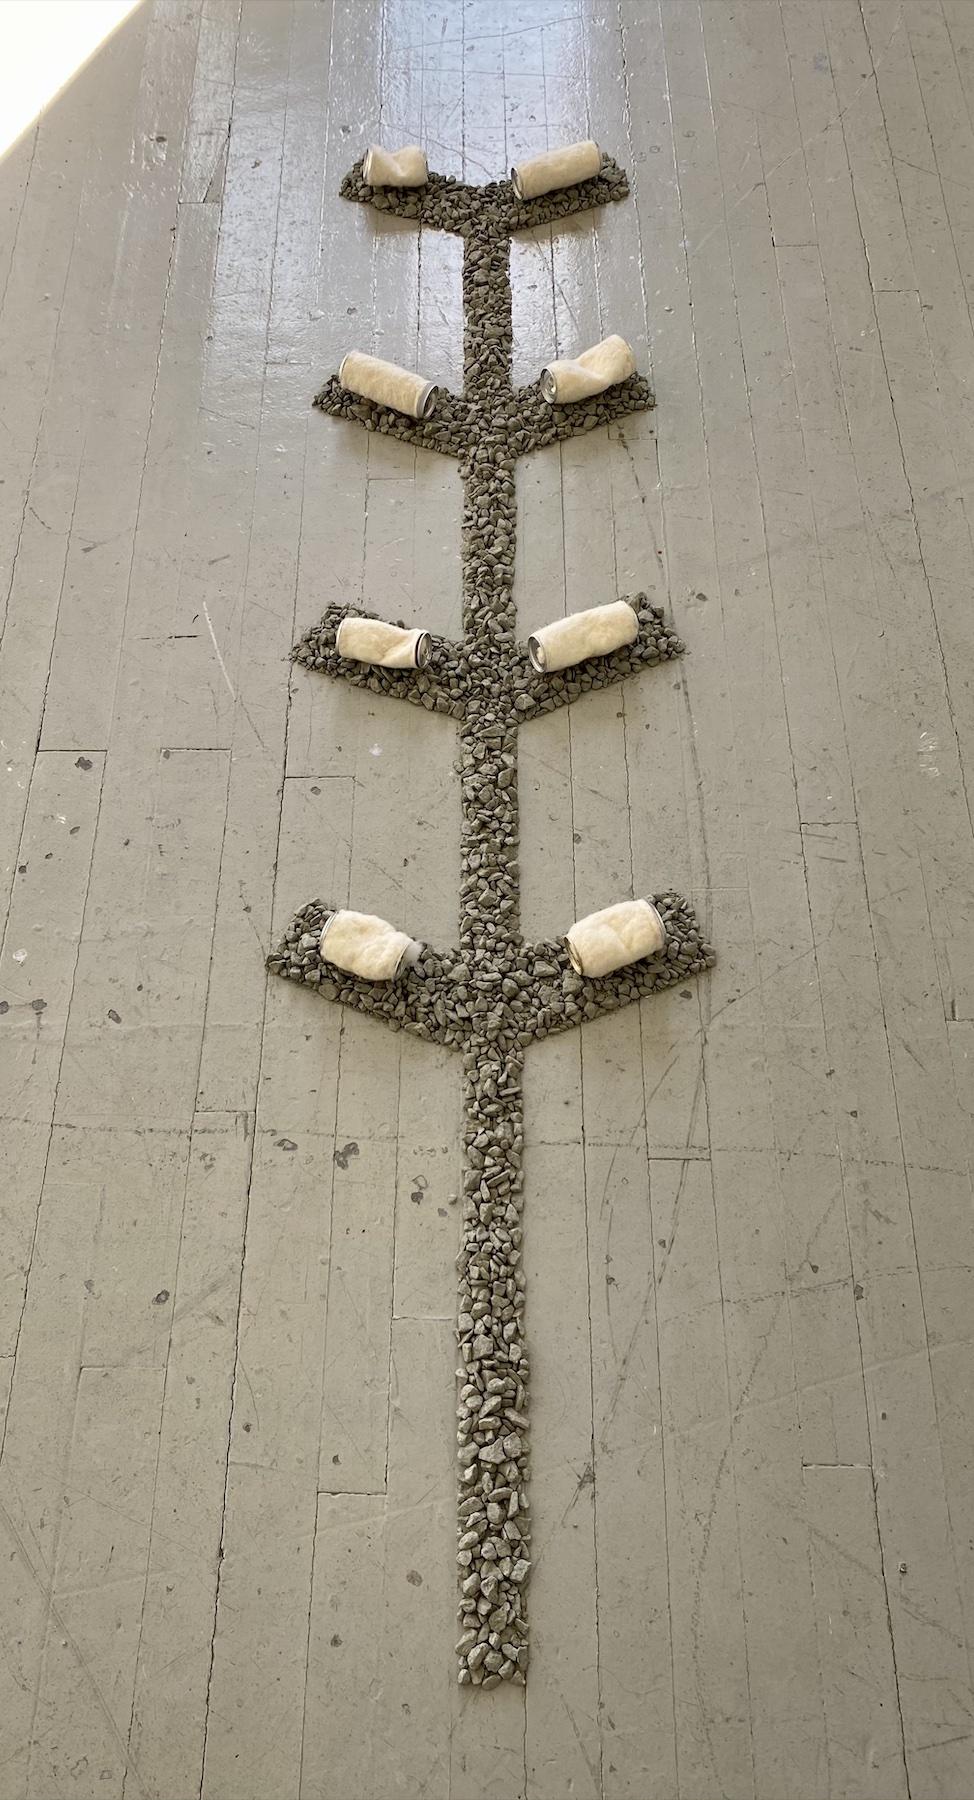 Loose gravel forms a shape on the floor, with felted aluminum cans placed on top. 